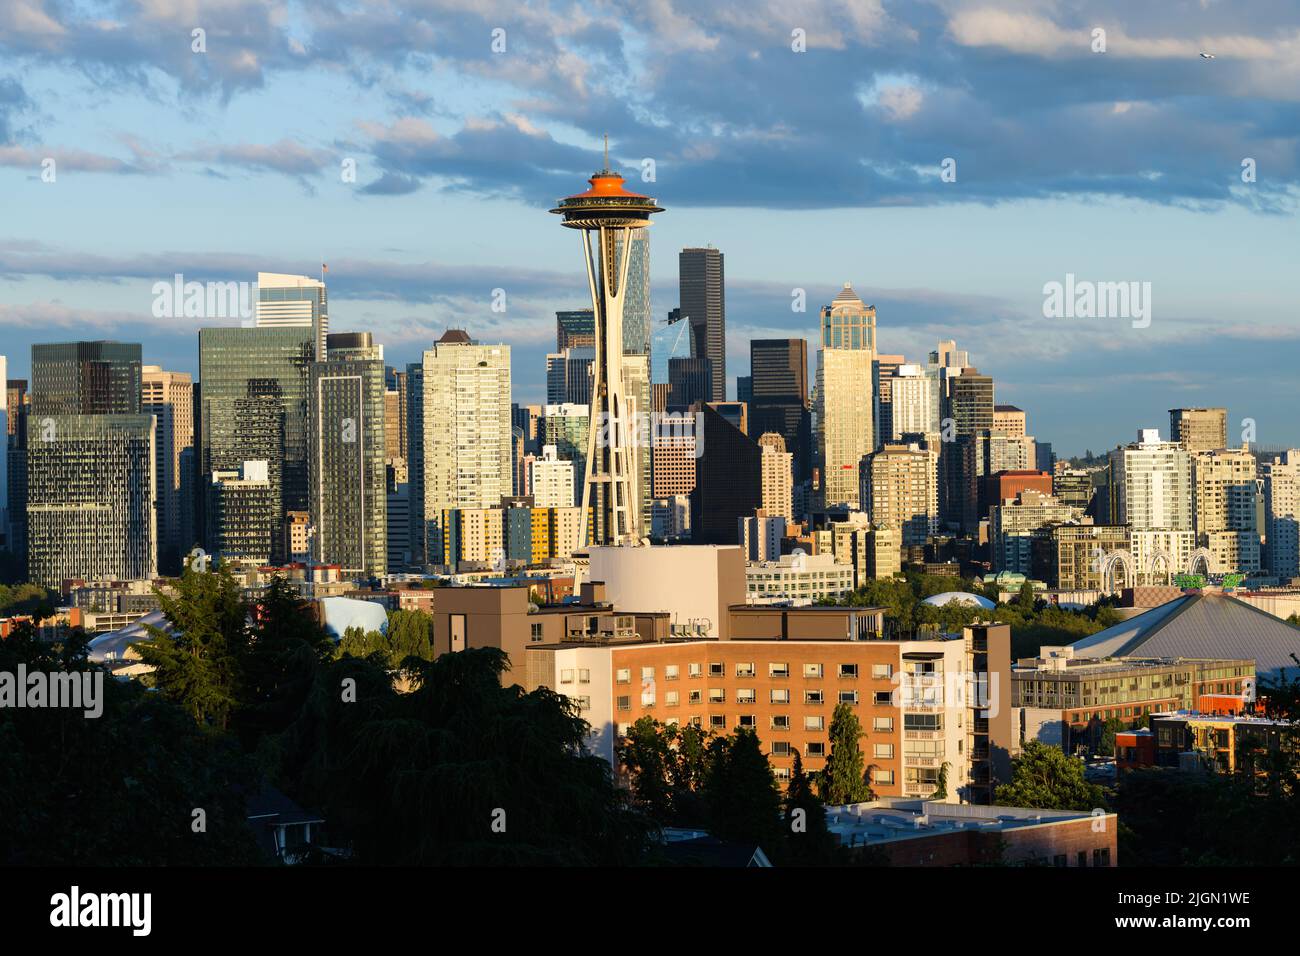 Seattle - July 08, 2022; Cityscape of the city of Seattle skyline on a summer evening with the Space Needle dome painted in orange Stock Photo